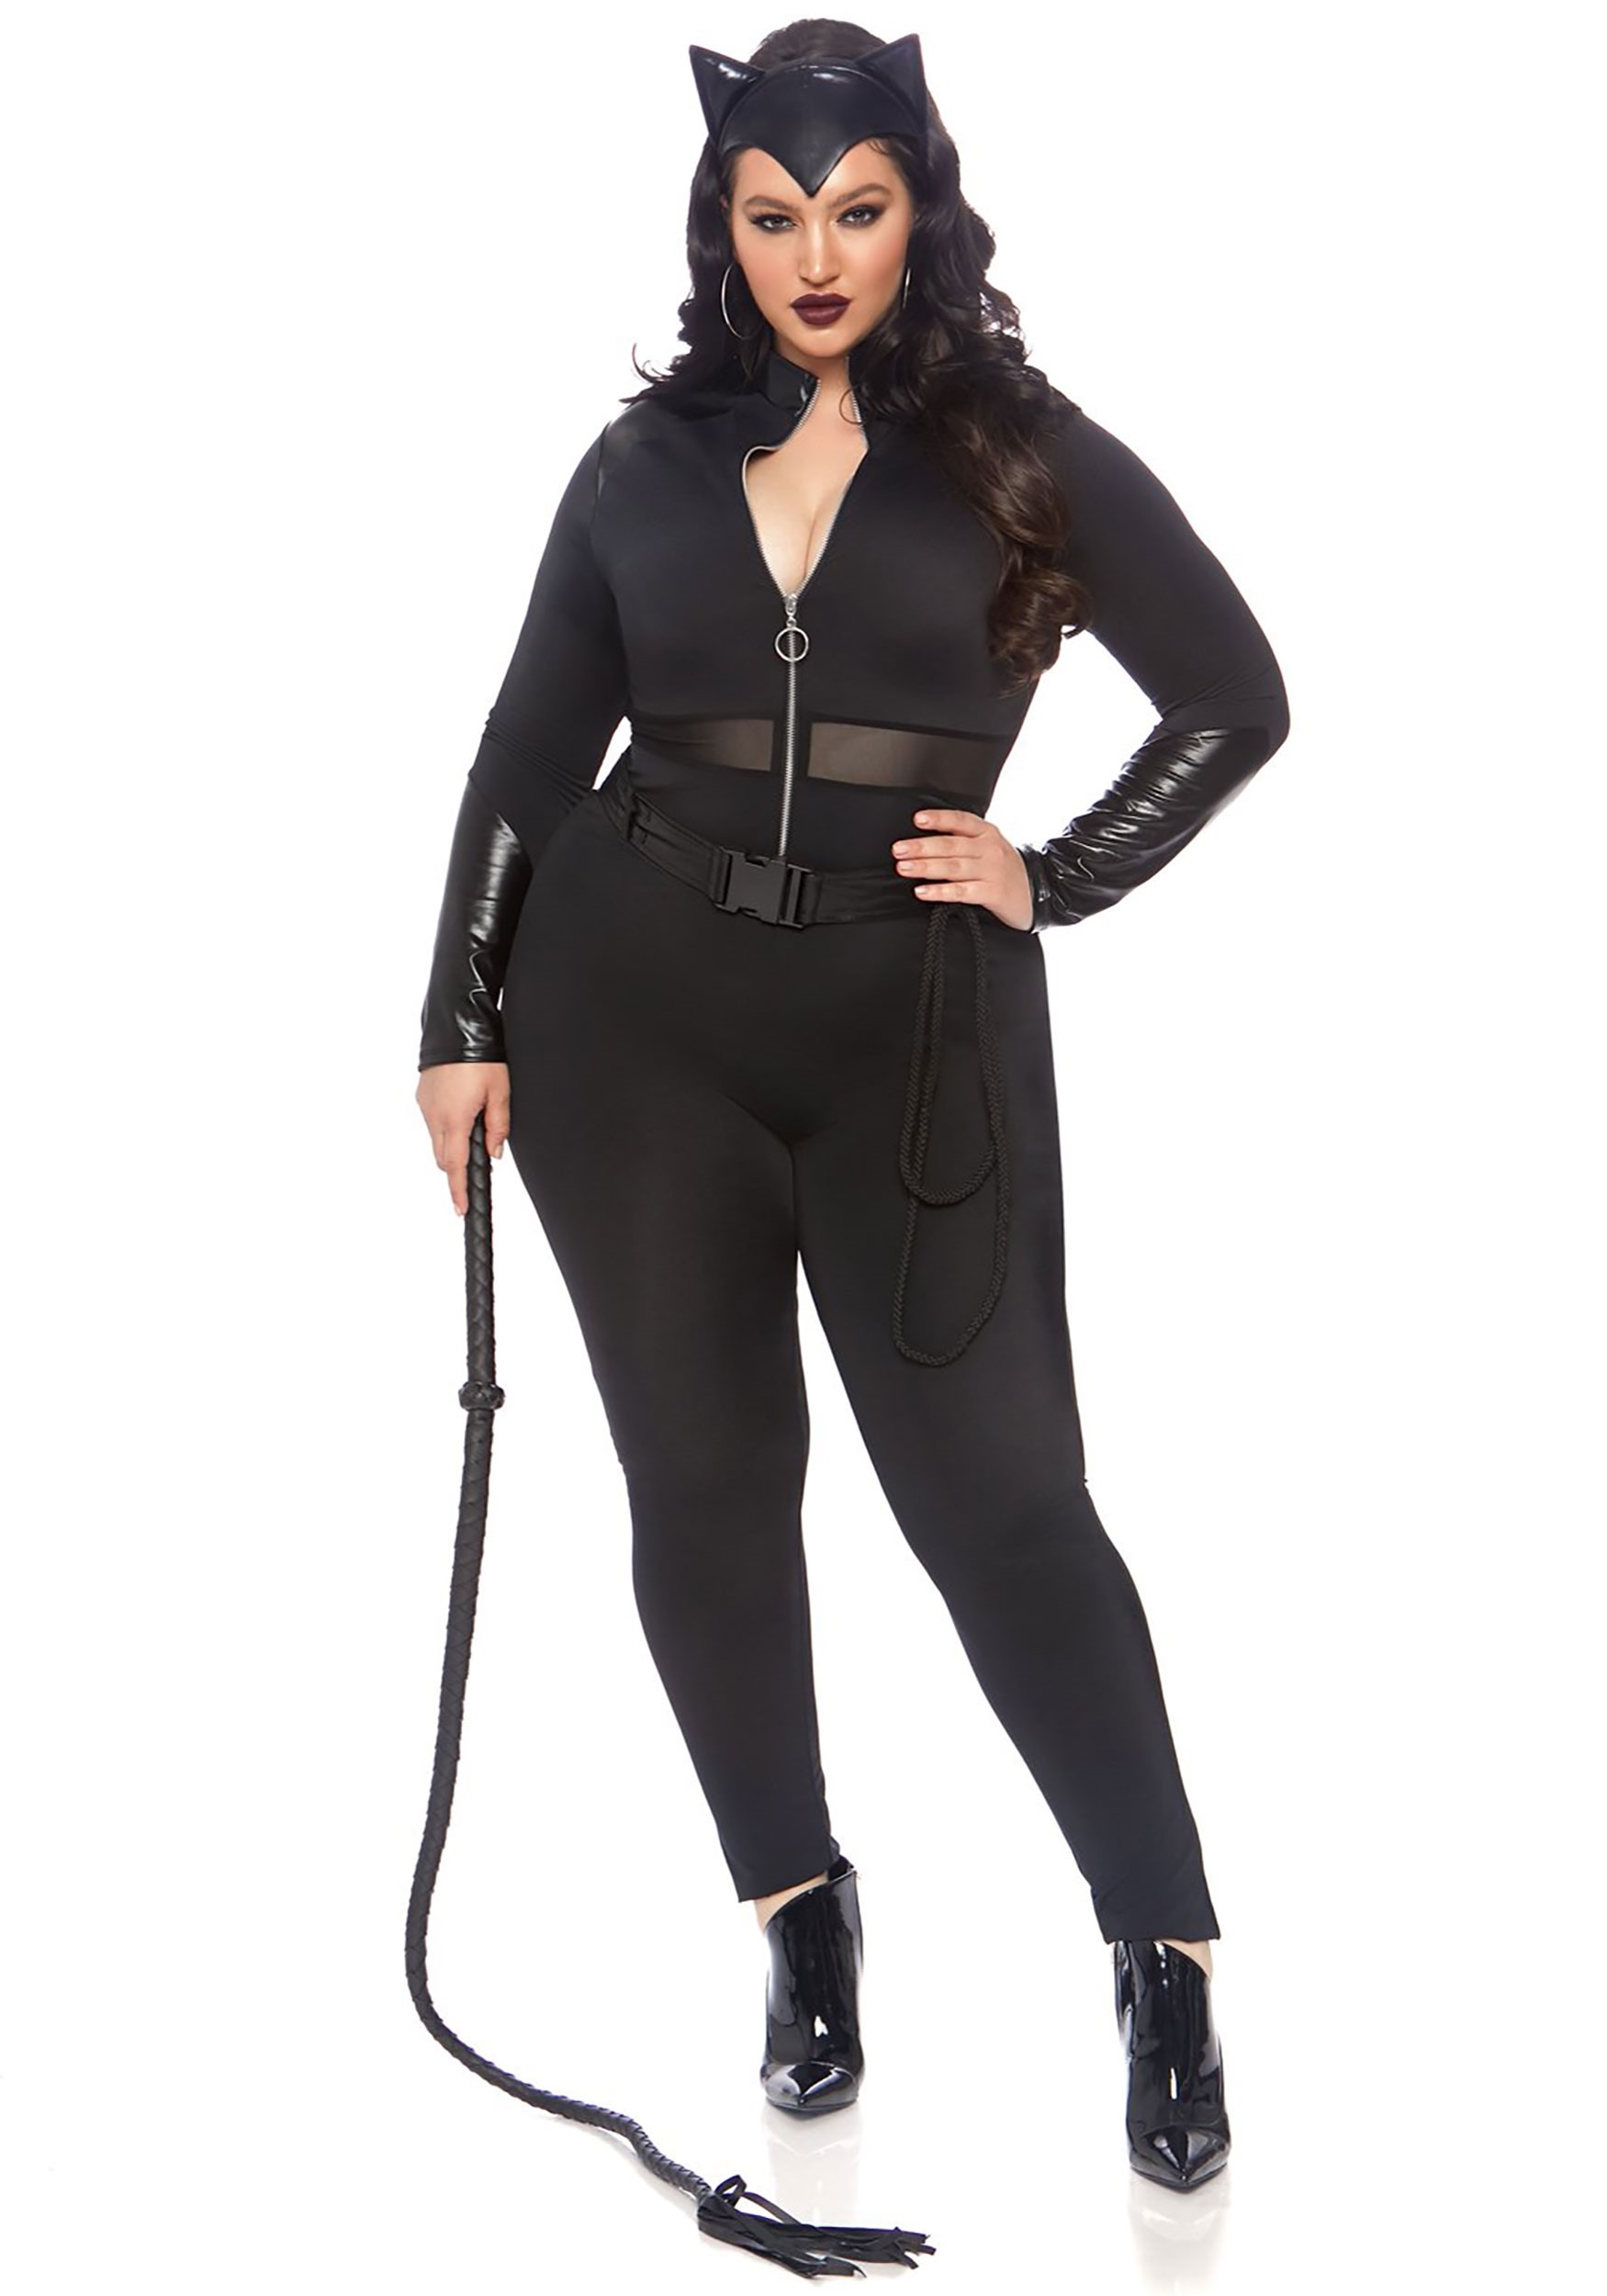 Plus Size Sultry Supervillain Women’s Costume